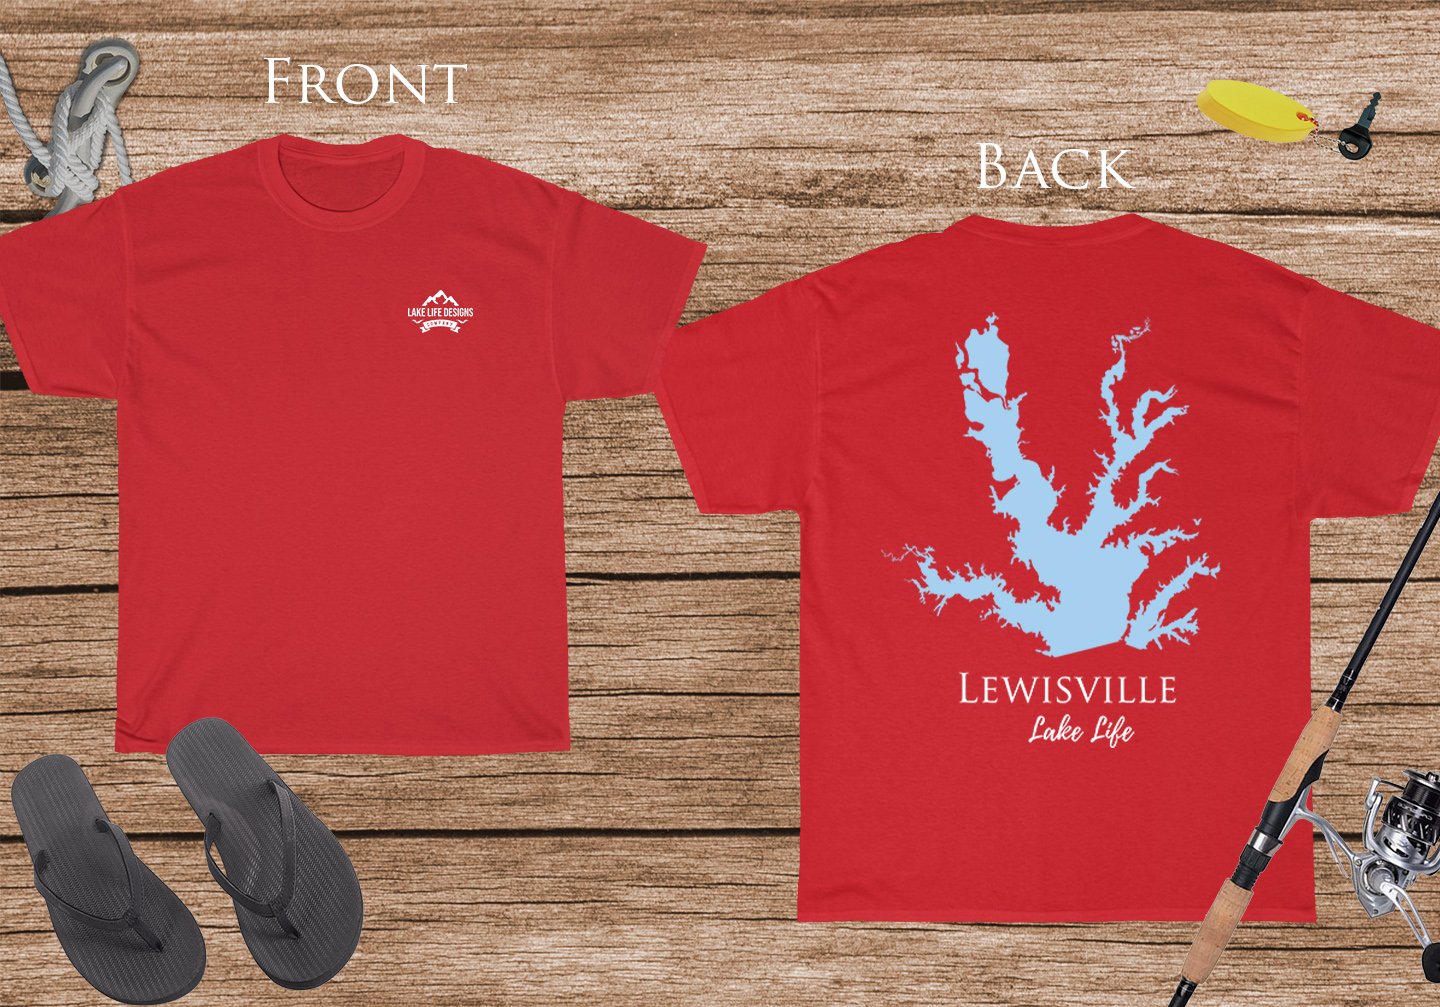 Lewisville Lake Life - Cotton Short Sleeved - FRONT & BACK PRINTED - Short Sleeved Cotton Tee - Texas Lake